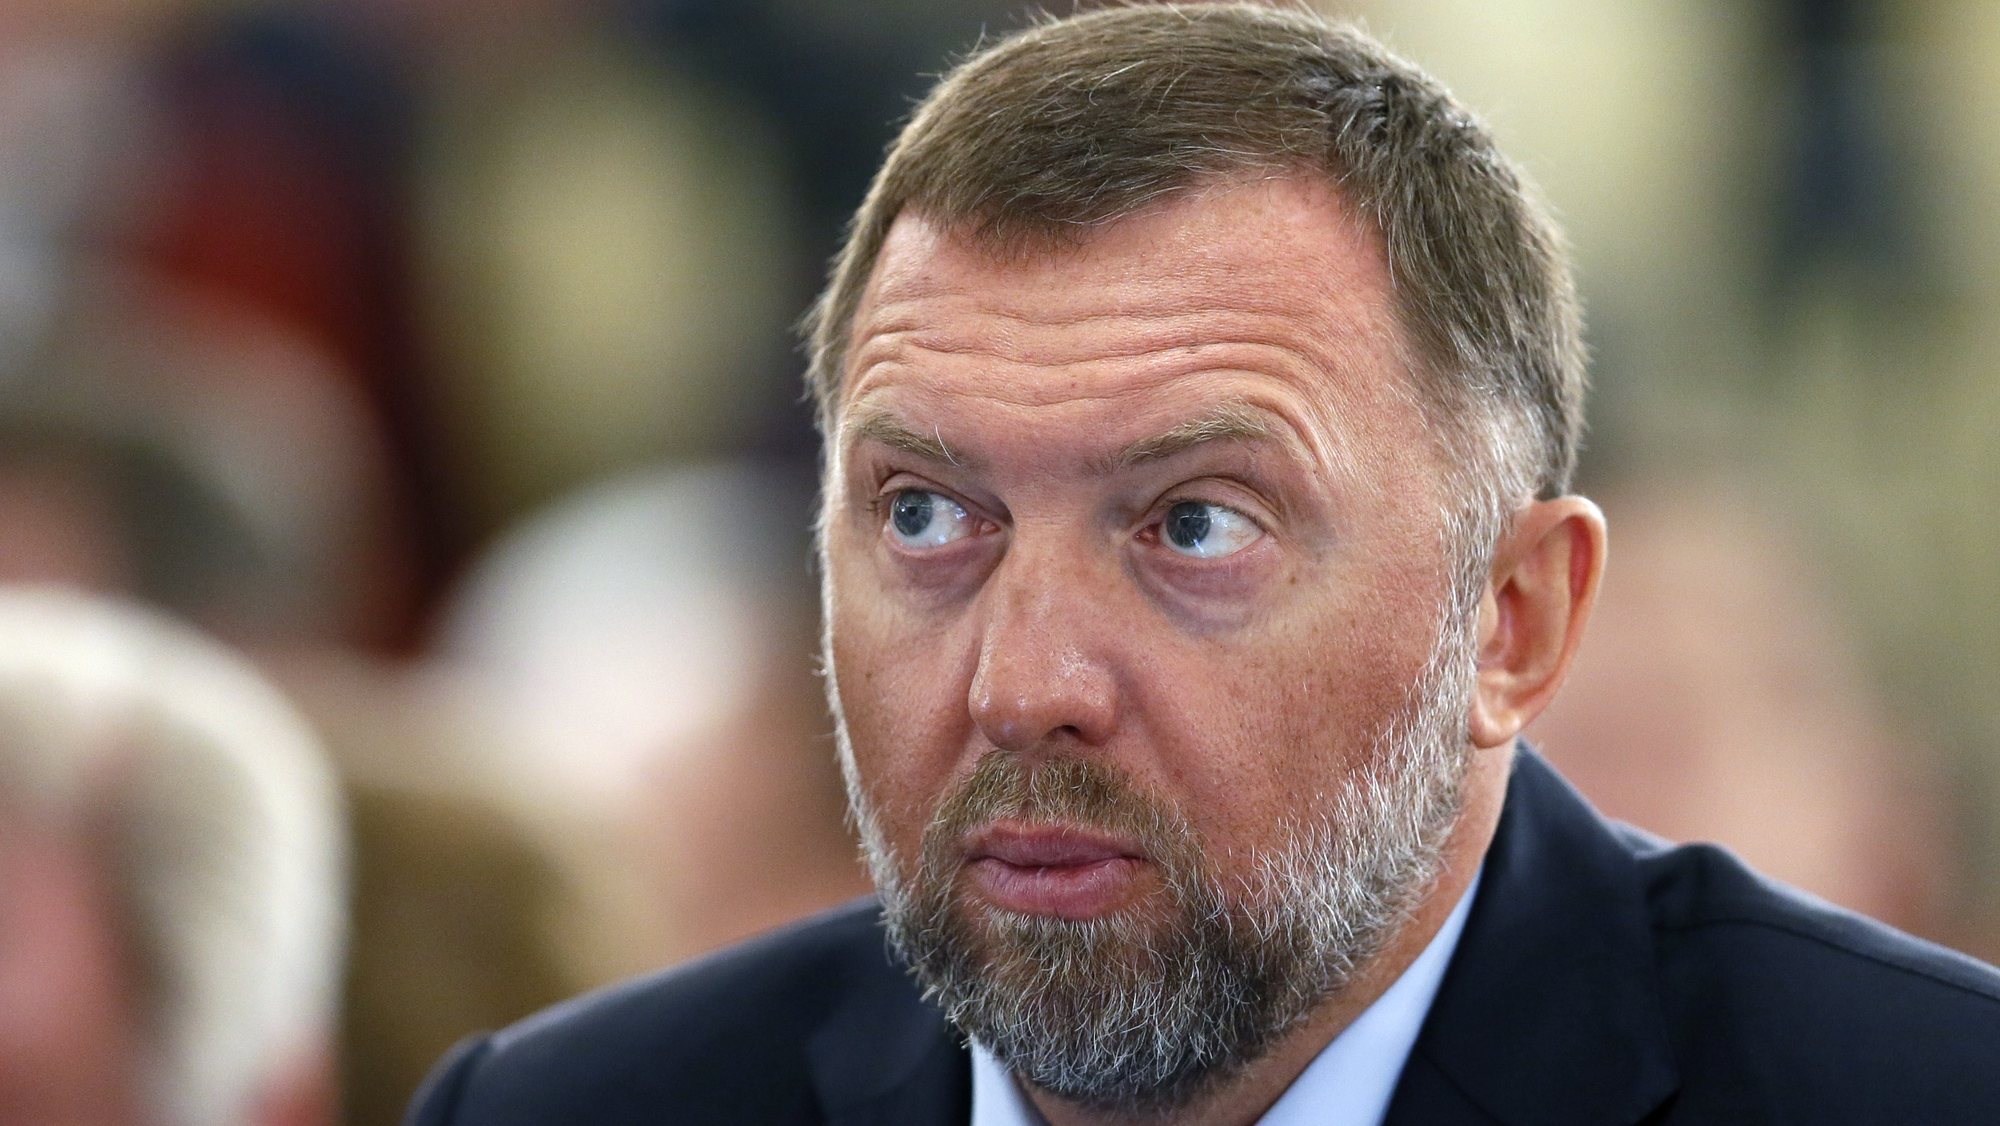 epa09532711 (FILE) - Oleg Deripaska, Russian aluminum giant RUSAL President, attends Russian Union of Industrialists and Entrepreneurs (RSPP) congress which is held within the Week of Russian Business in Moscow, Russia, 19 March 2015 (reissued 19 October 2021). The FBI raids the home of Russian oligarch and Putin ally Oleg Deripaska in the Embassy Row neighborhood of Washington, DC, USA, 19 October 2021. The FBI did not specify the reason of the court-authorized raid.  EPA/YURI KOCHETKOV *** Local Caption *** 54293956